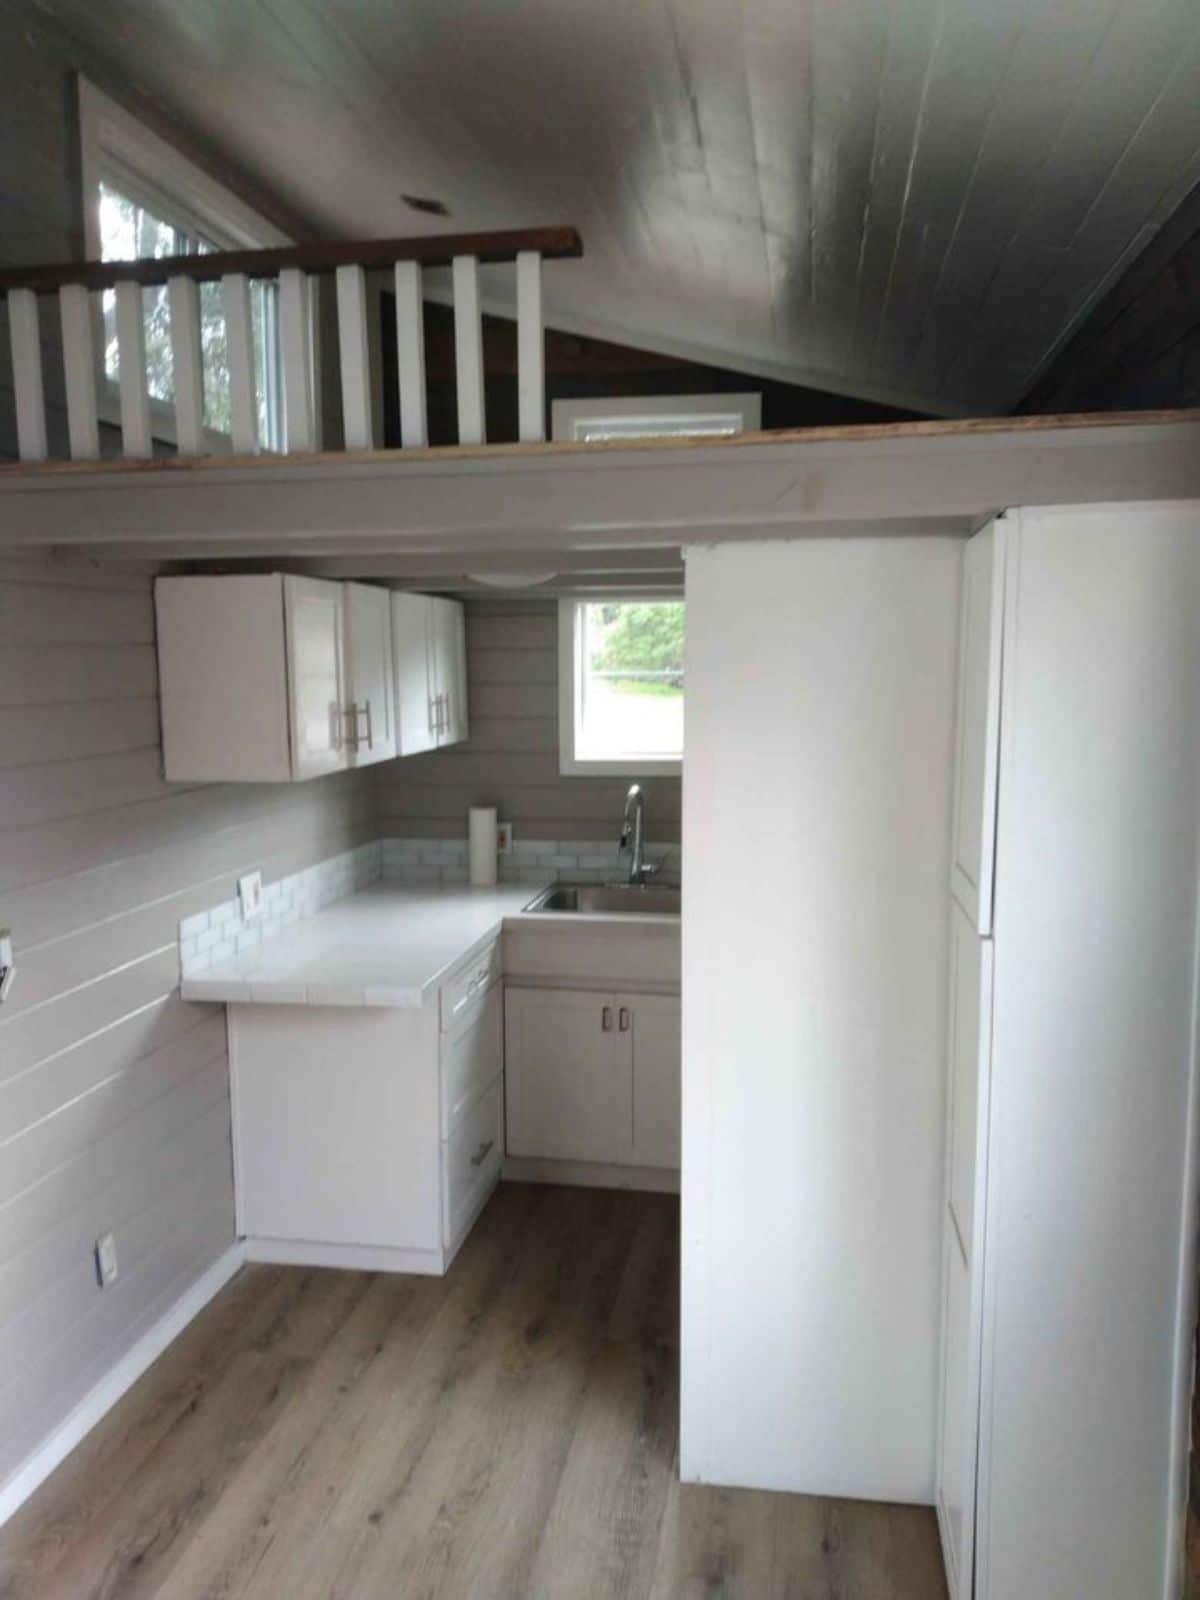 view into kitchen of tiny home with white cabinets and loft above